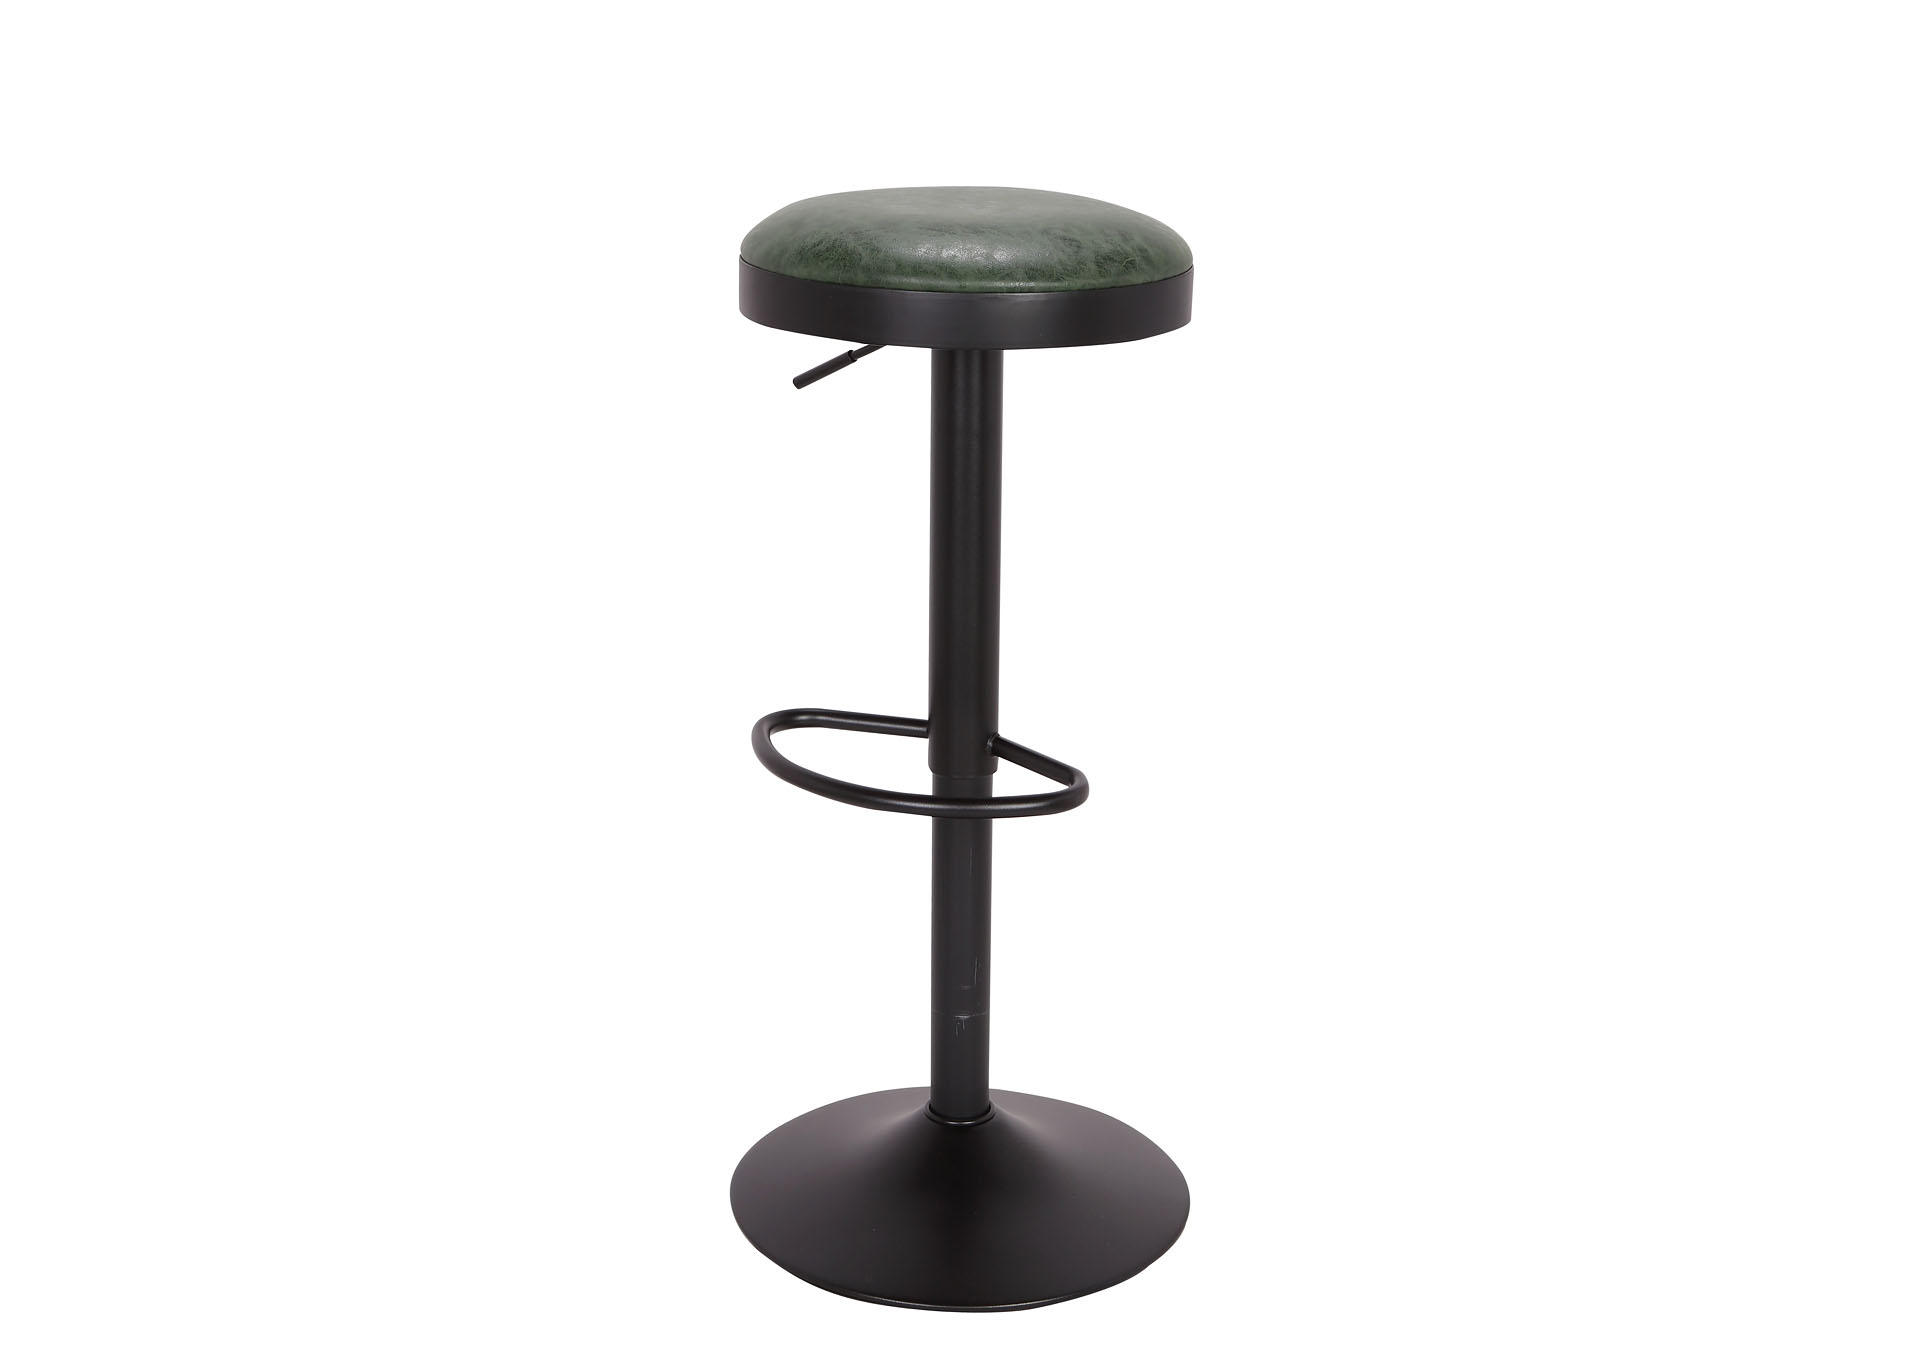 Green Vintage Style Backless Adjustable Stool,Chintaly Imports